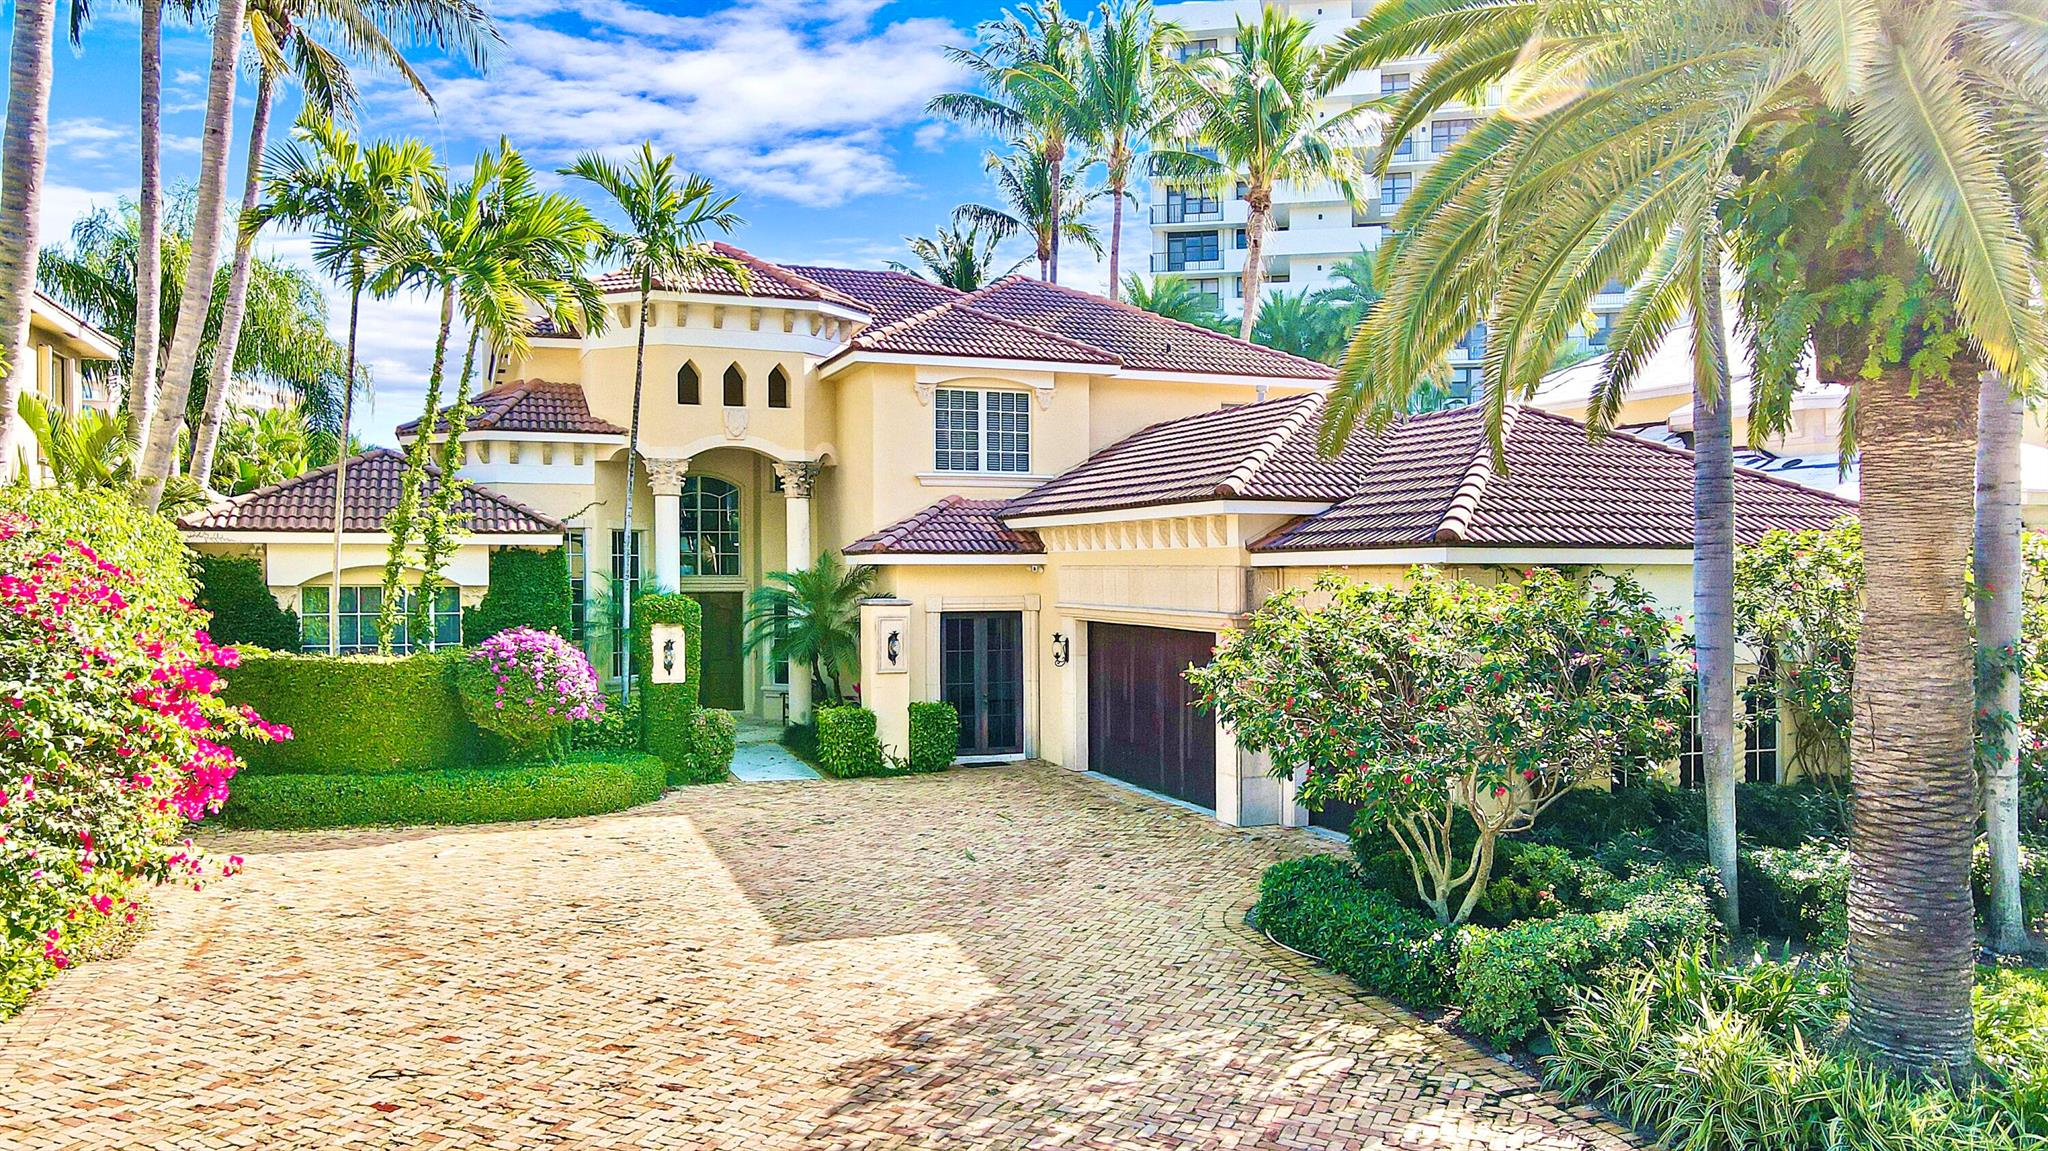 Set on 1/3 acre of lush, tropical landscaping and tucked away in an enchanted corner of the manicured grounds of Boca Highland Beach Club and Marina, this strikingly beautiful 2-story 6BR/5.2BA oceanside Estate is nestled between the sparkling, blue Atlantic and winding Intracoastal, offering a sprawling floorplan perfect for both privacy and entertainment! Upon arriving, you'll be greeted by an over-sized Chicago brick motor court, serene palms, and vine-covered walls. Timeless elegance and thoughtful, luxurious appointments greet you at every turn--from soaring ceilings and striking archways to the gourmet kitchen--complete with hi-end stainless appliances, massive wood island and gas stove--to the movie theater, sauna, steam shower, and 7,238 sq.ft. of amenities too numerous to mention!